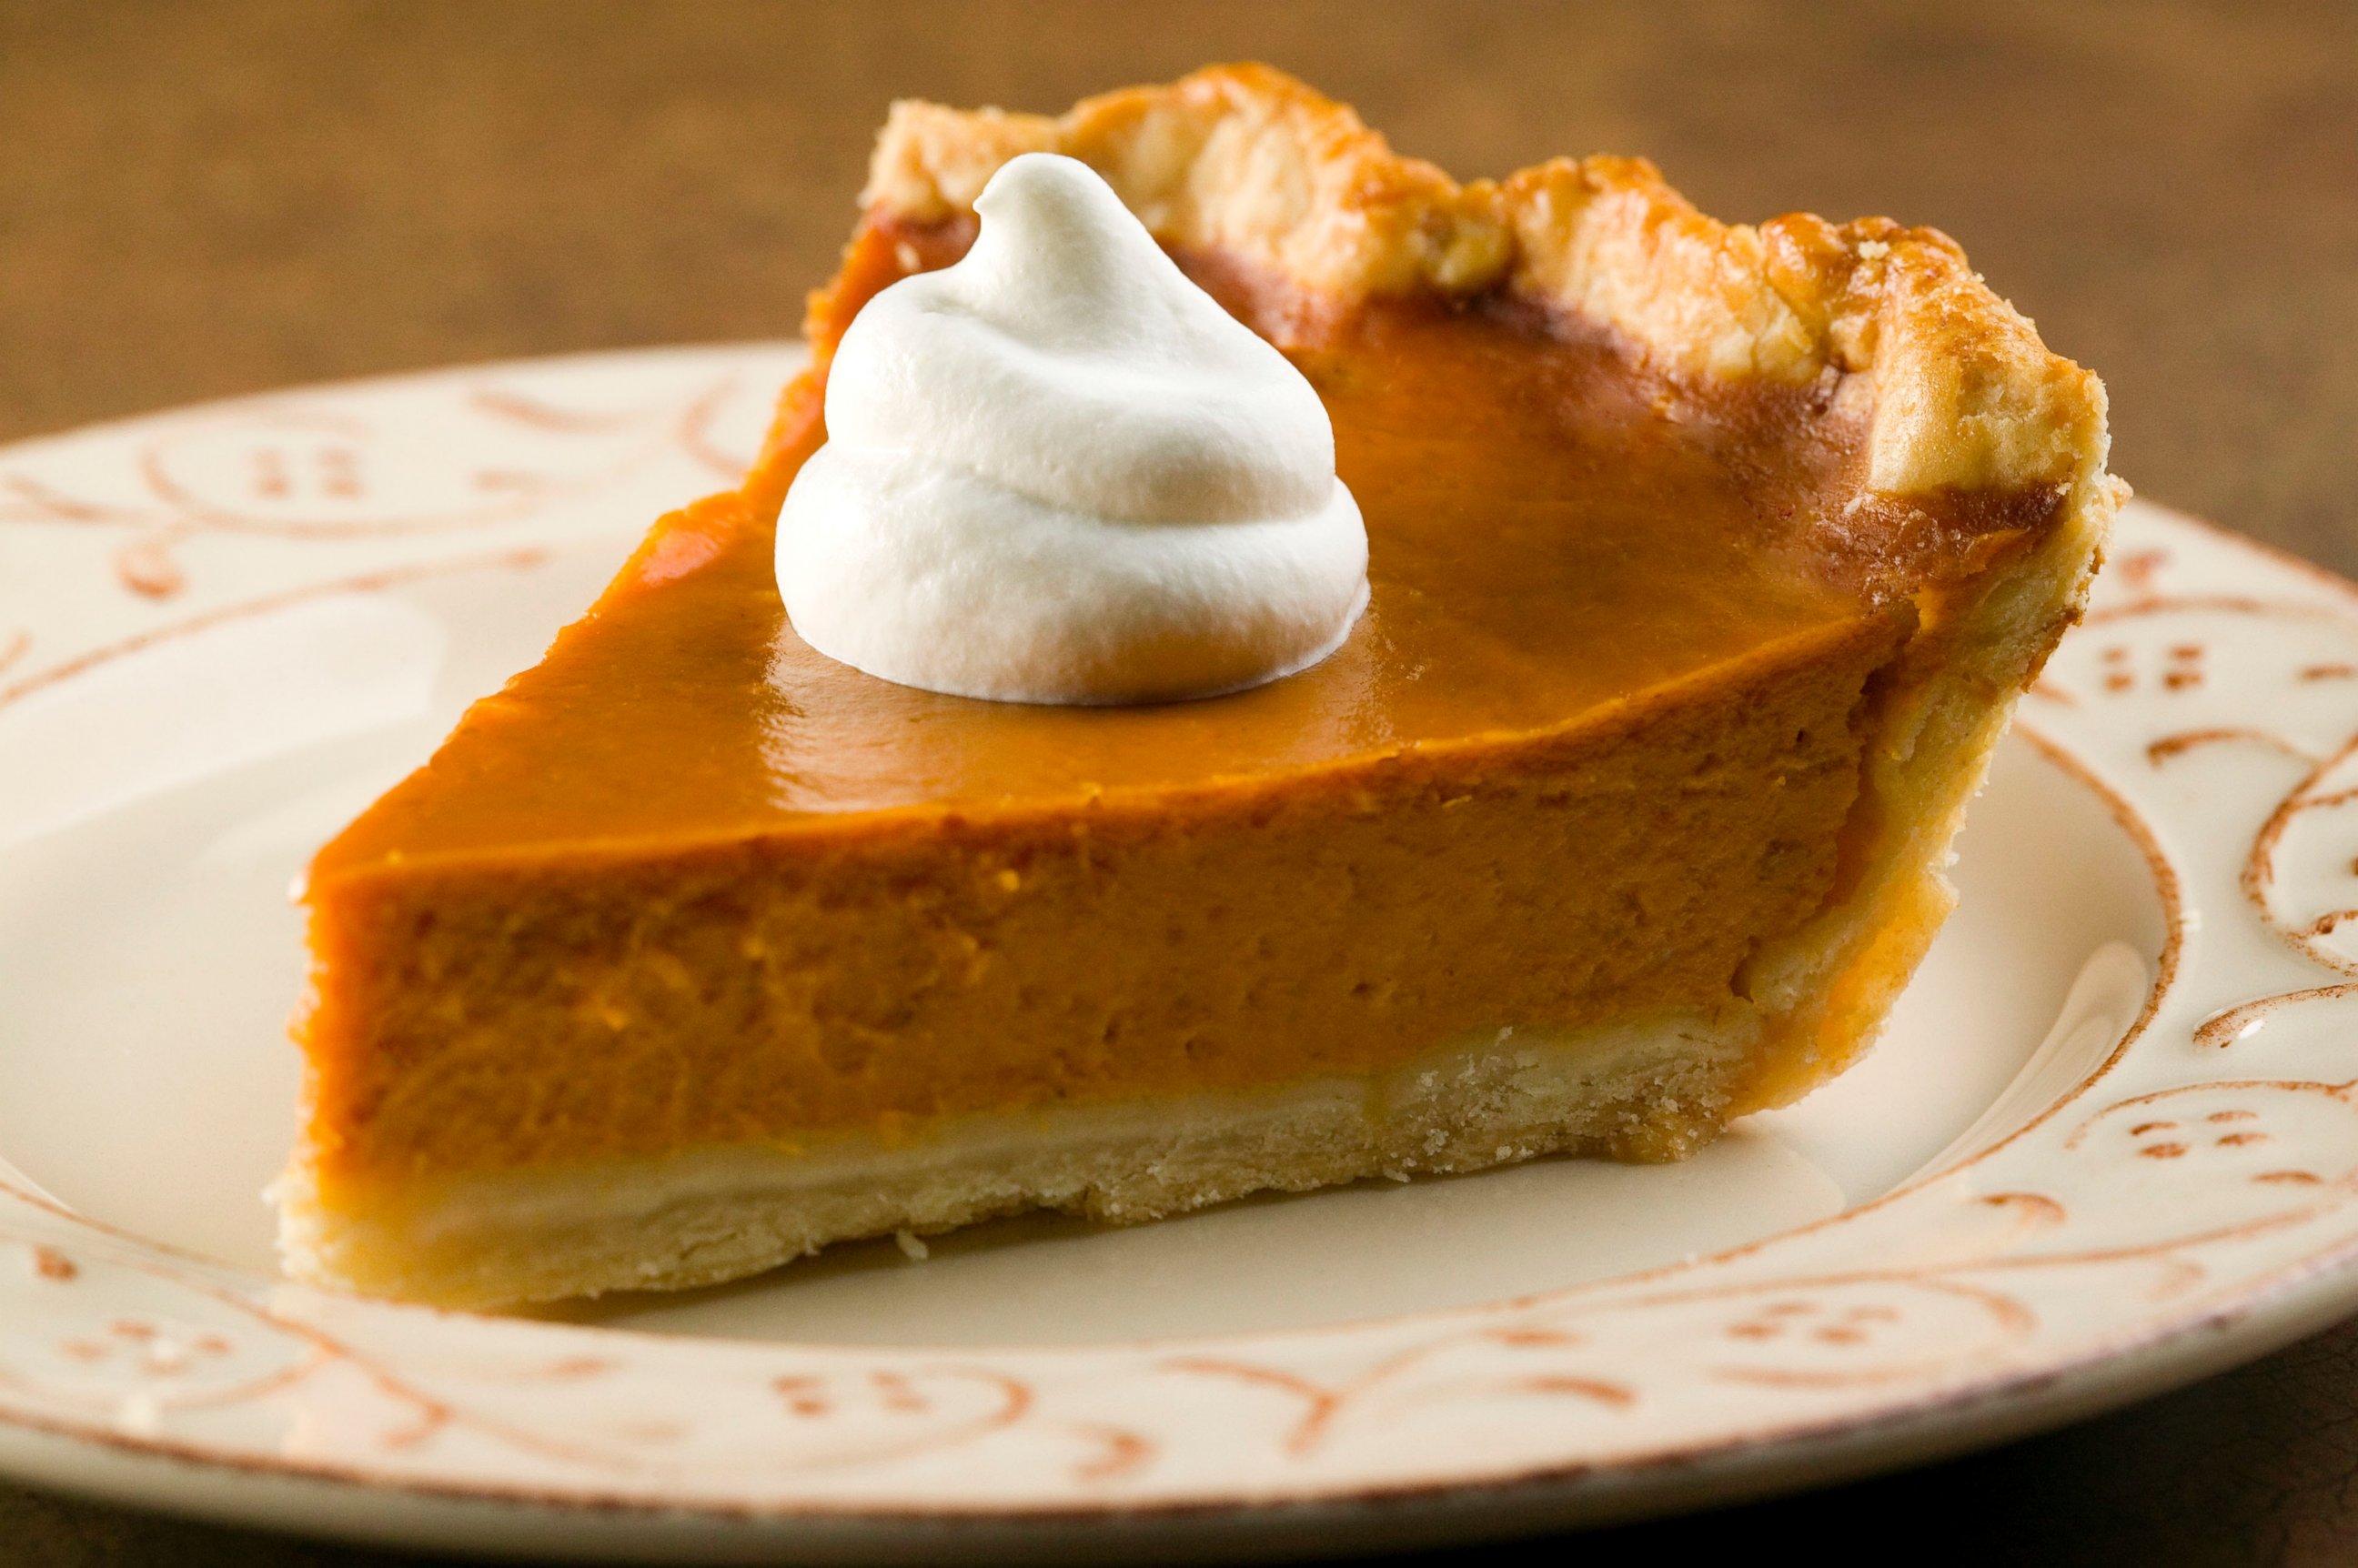 PHOTO: There are 374 calories in one piece of pumpkin pie.